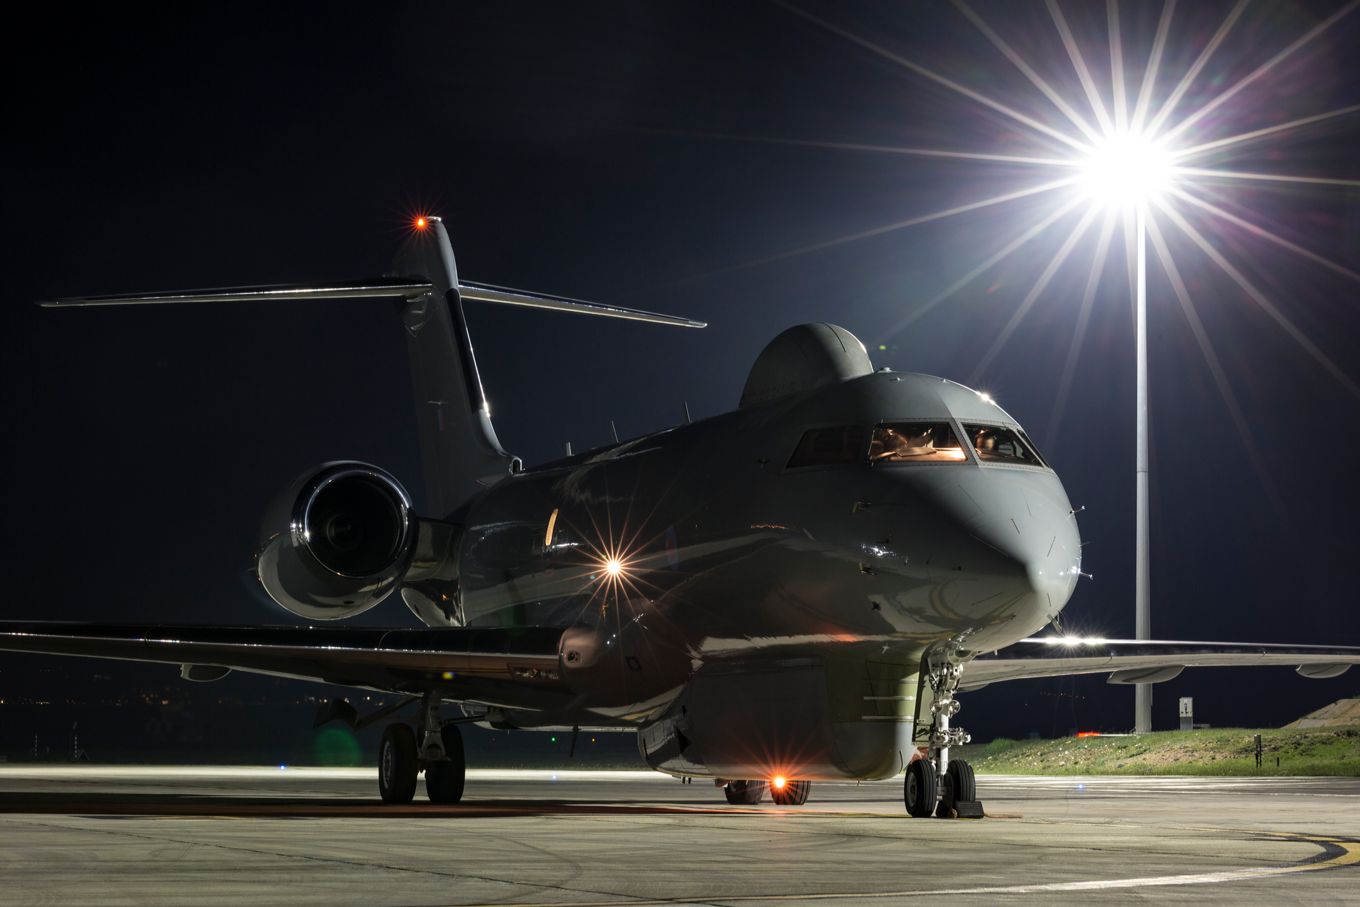 Image shows an RAF Sentinel R1 aircraft on the ground at night.